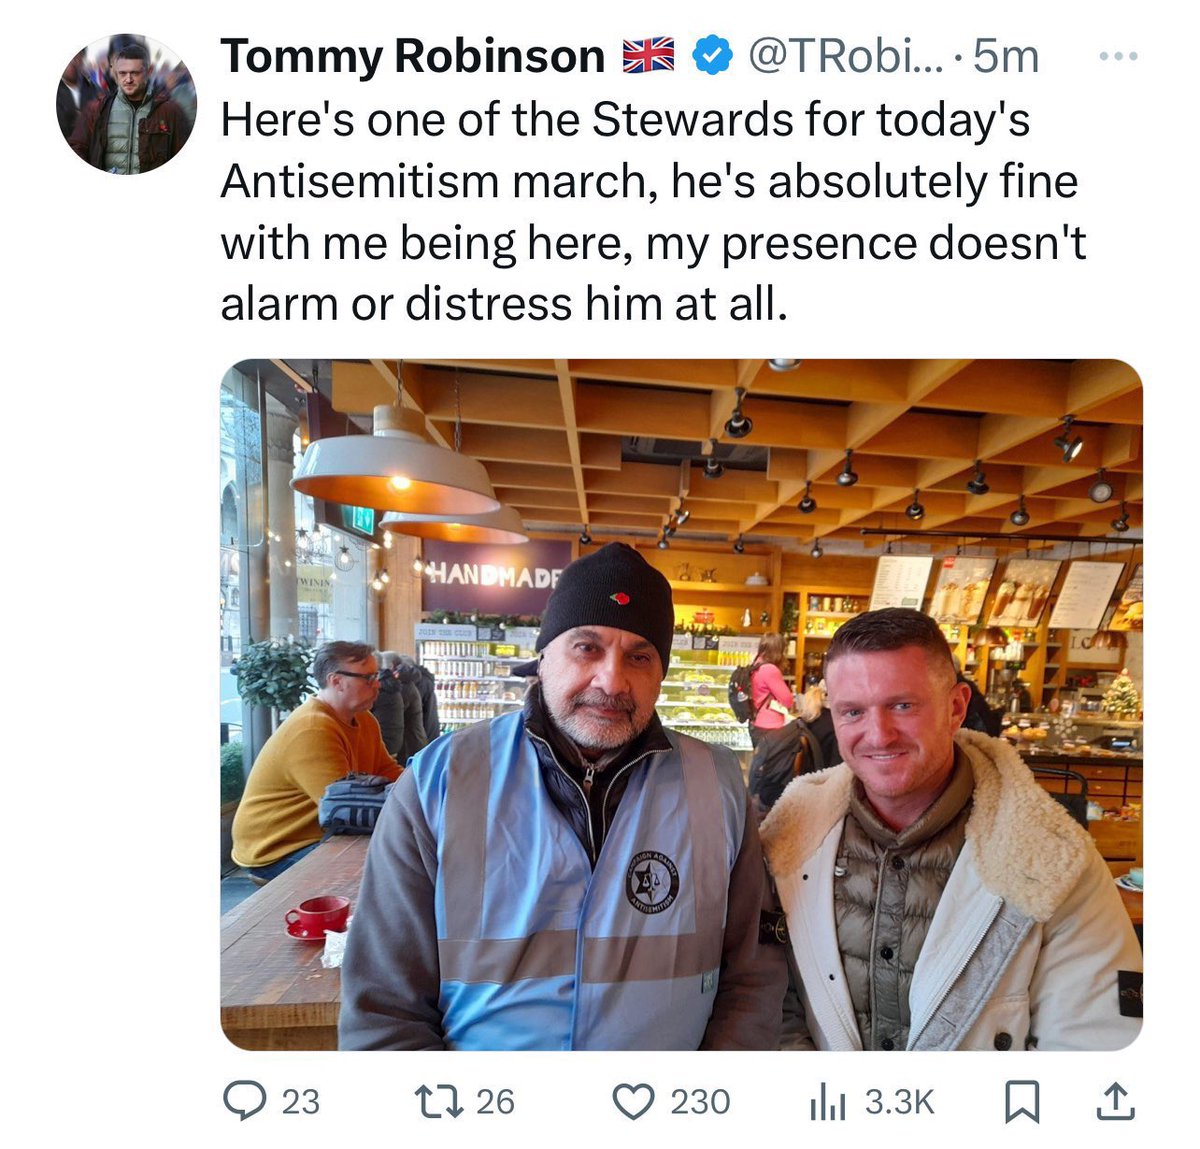 During the initial mobilisations against the pro-Palestinian demonstrations, it appears that Tommy Robinson was welcomed by a steward from Gideon Falter's organisation, the CAA.